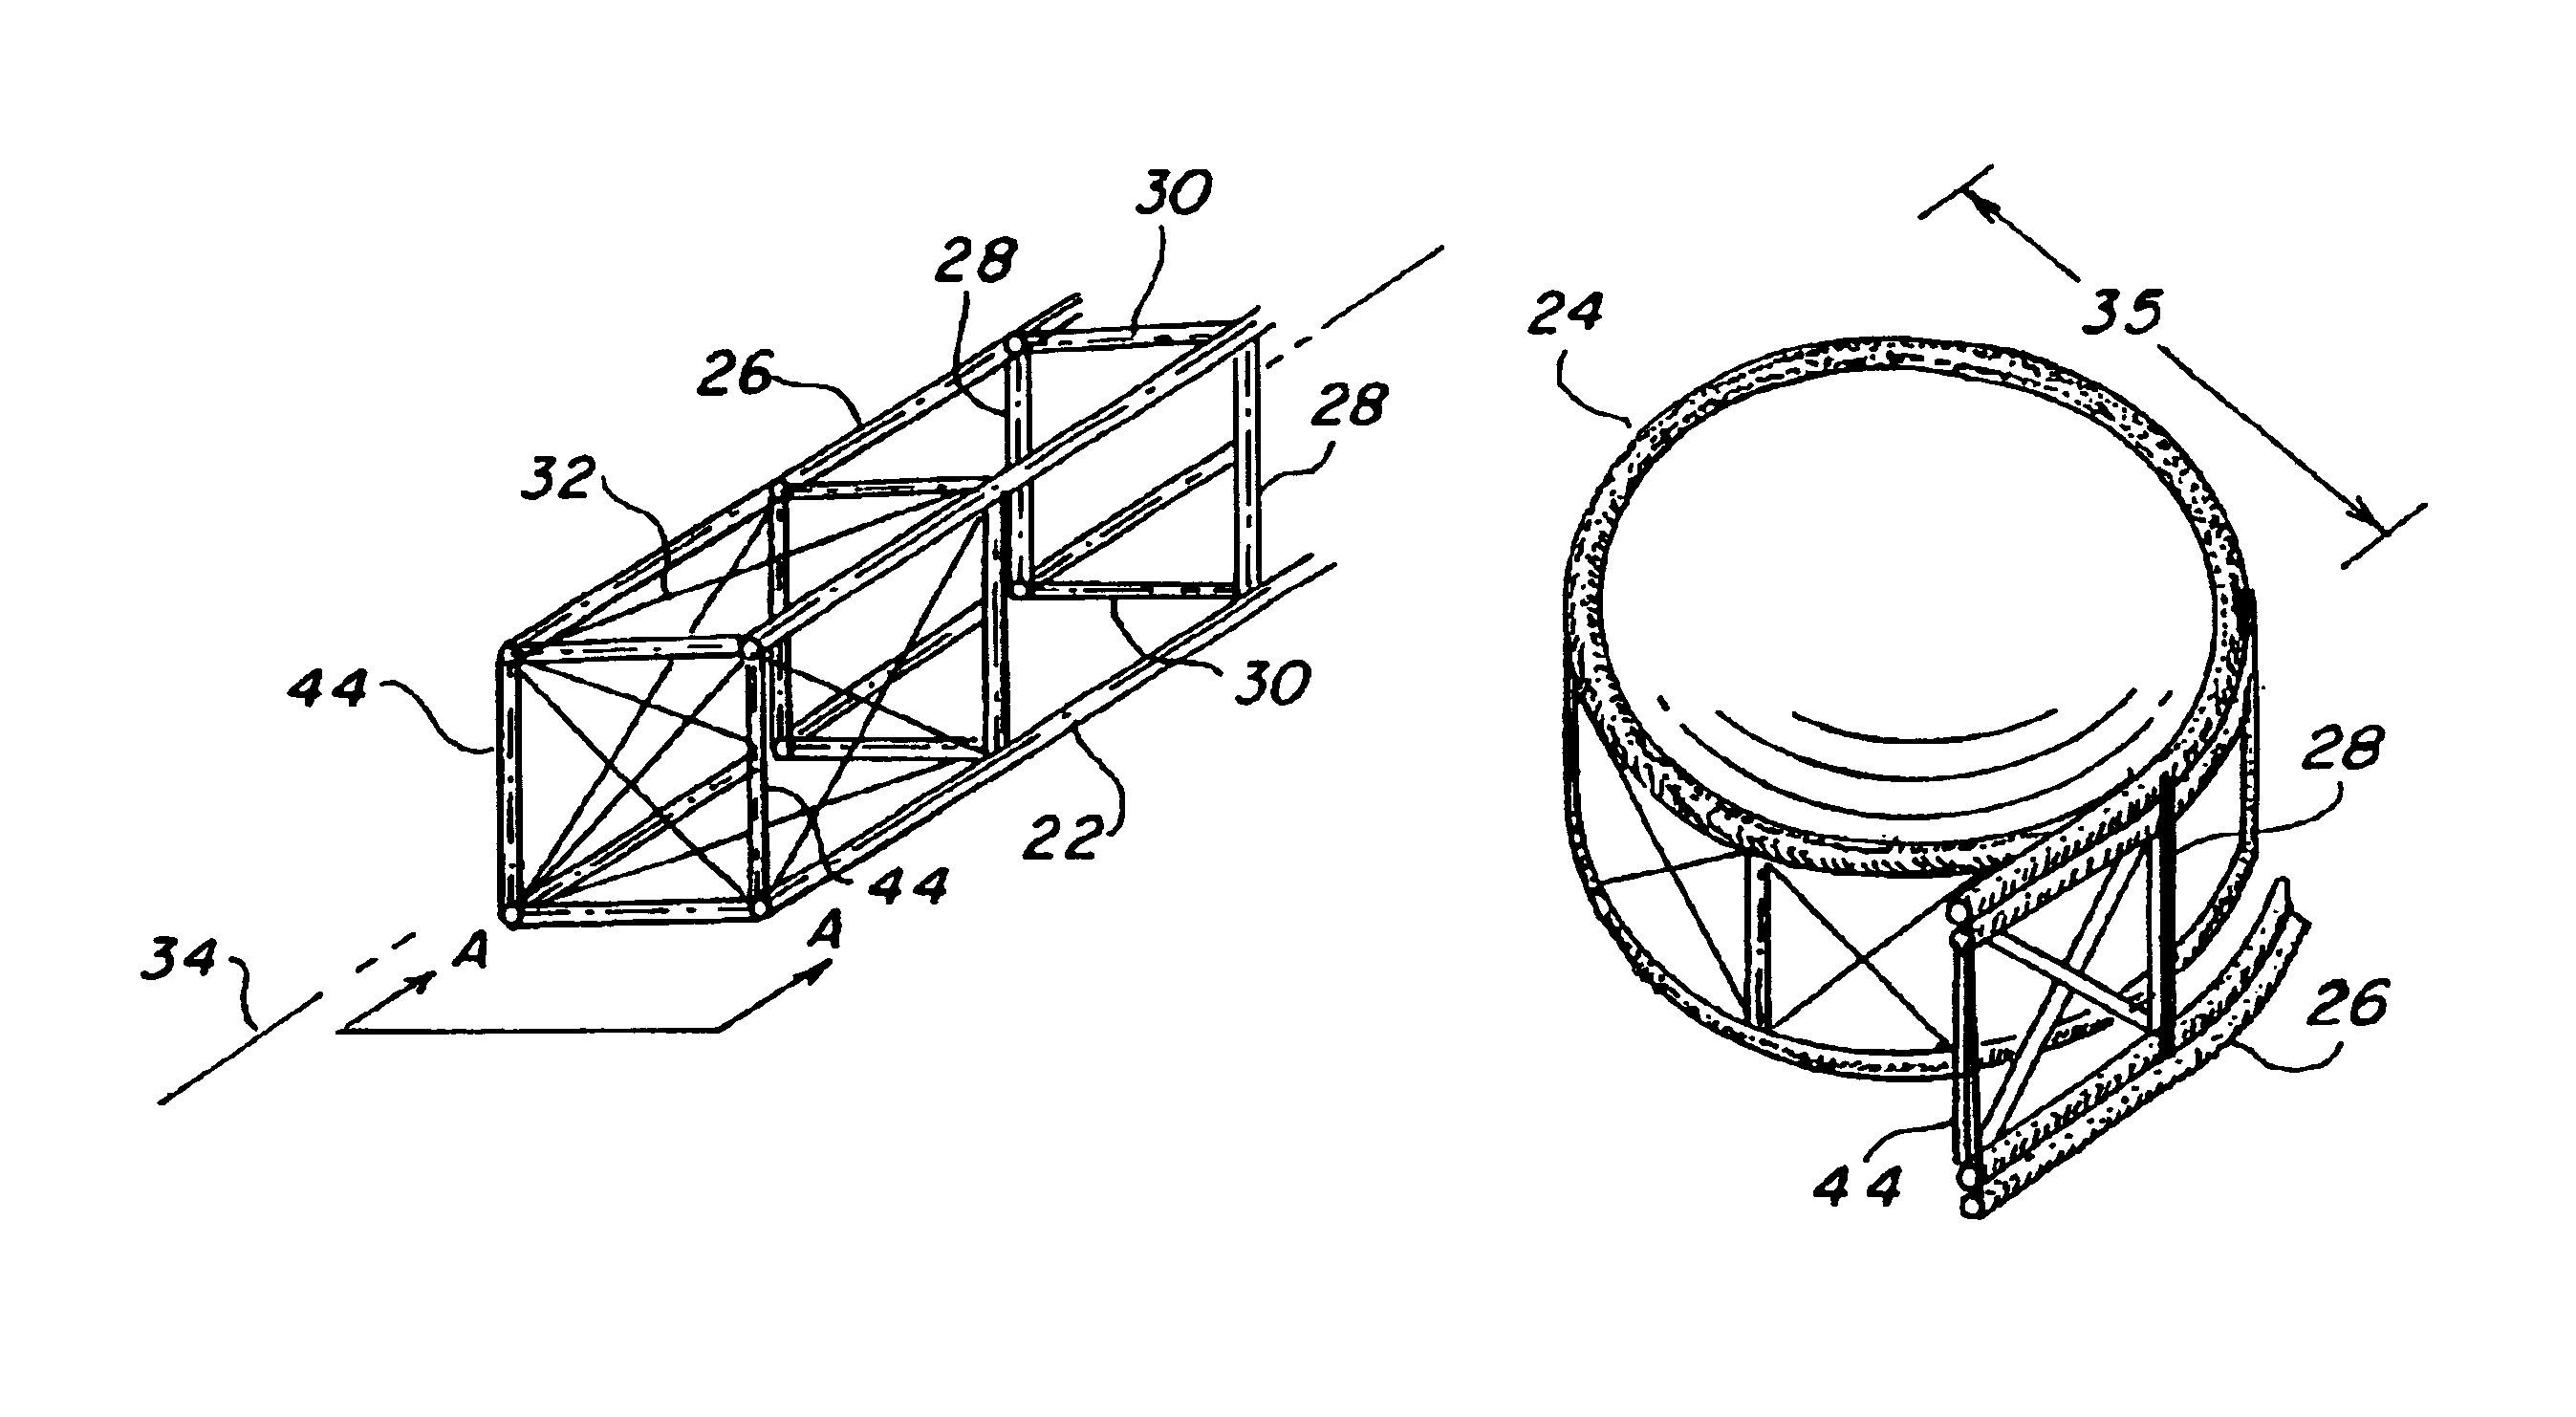 Elongated truss boom structures for space applications